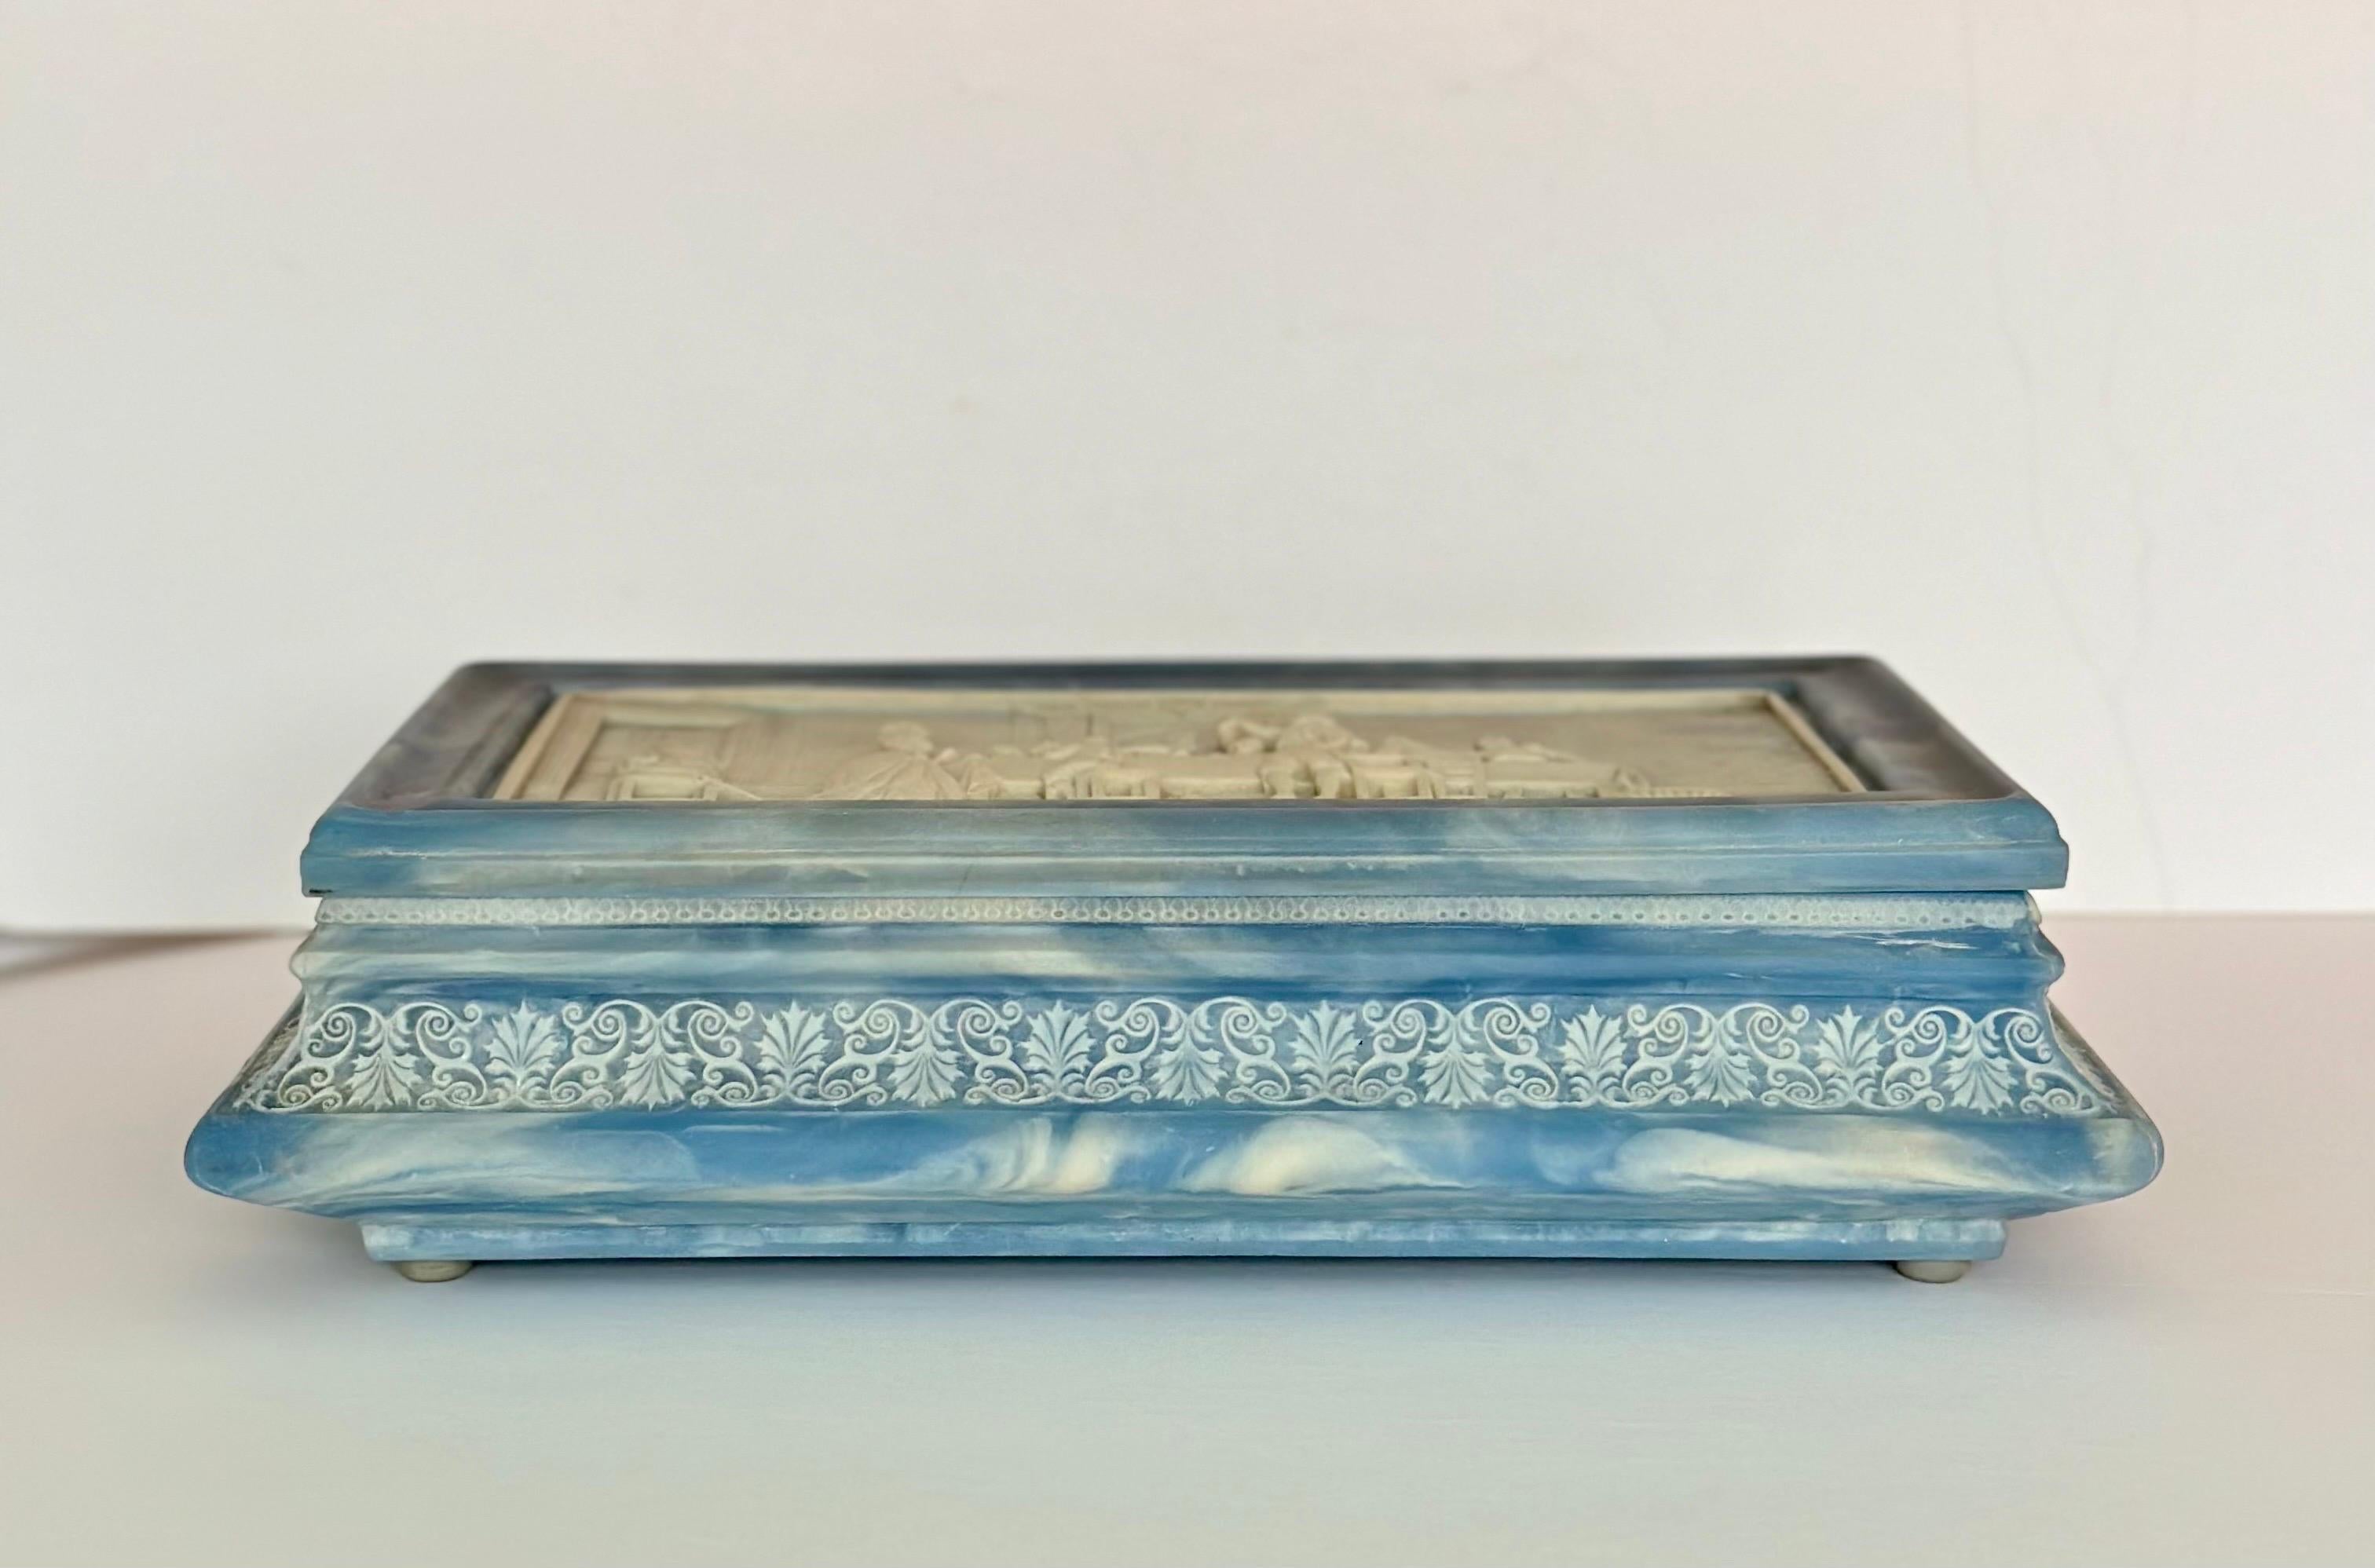 We are very pleased to offer a beautiful decorative box, circa the 1980s.  This box is a true masterpiece, boasting the artistry and craftsmanship that Incolay stone is renowned for.  The material itself is a remarkable blend of natural minerals and